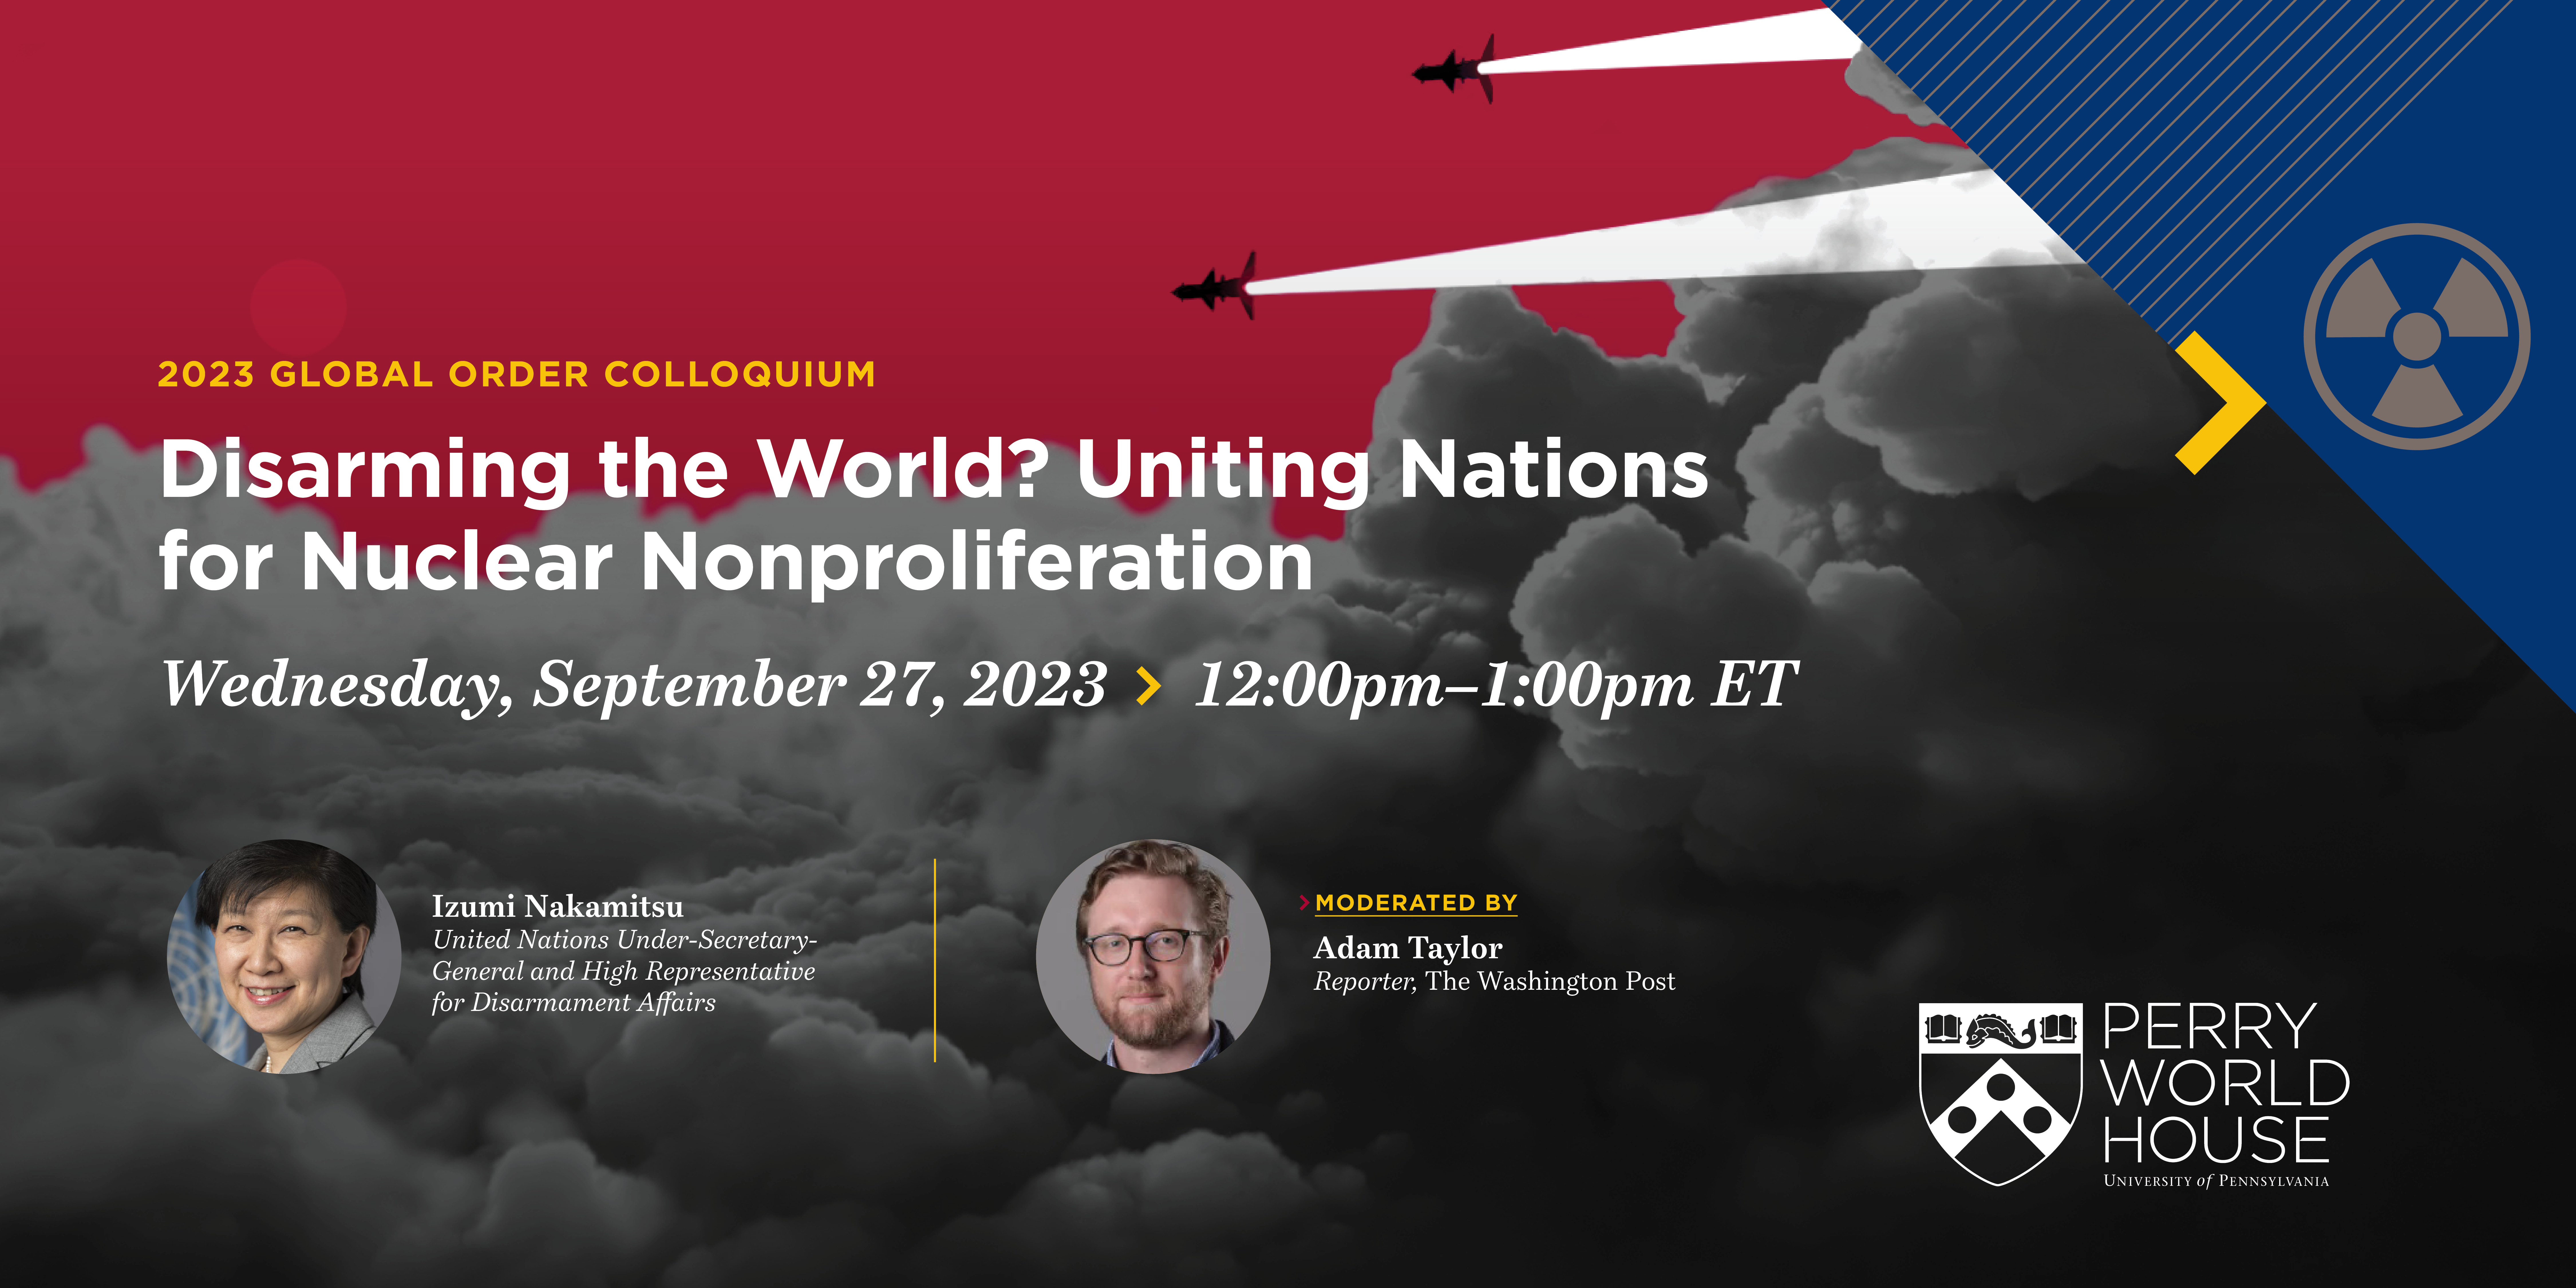 Disarming the World? Uniting Nations for Nuclear Nonproliferation. Wednesday September 27, 2023, 12:00-1:00PM